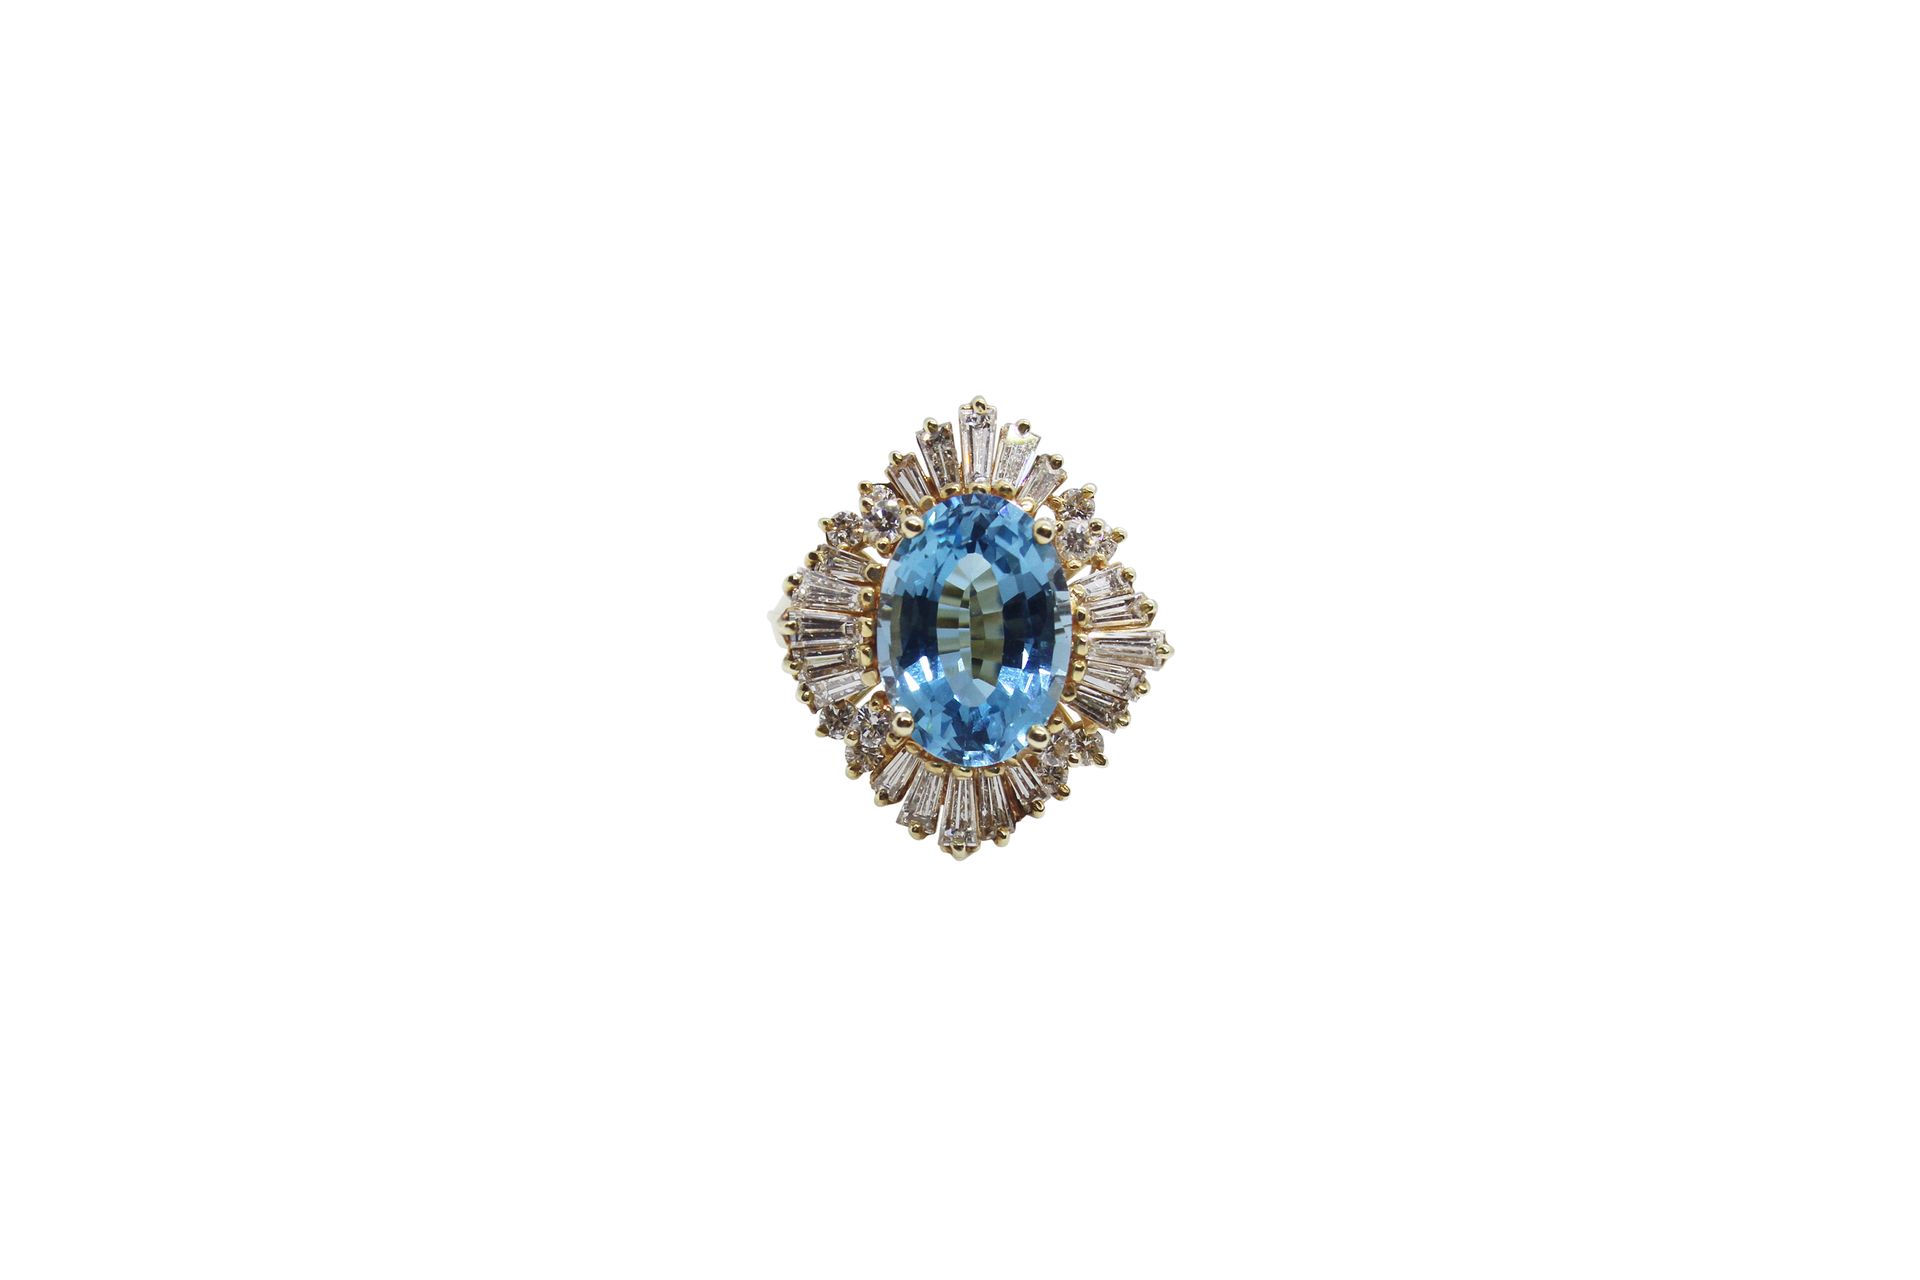 18k gold ring set with blue topaz and diamonds Bague en or 18k sertie d'une topa&hellip;